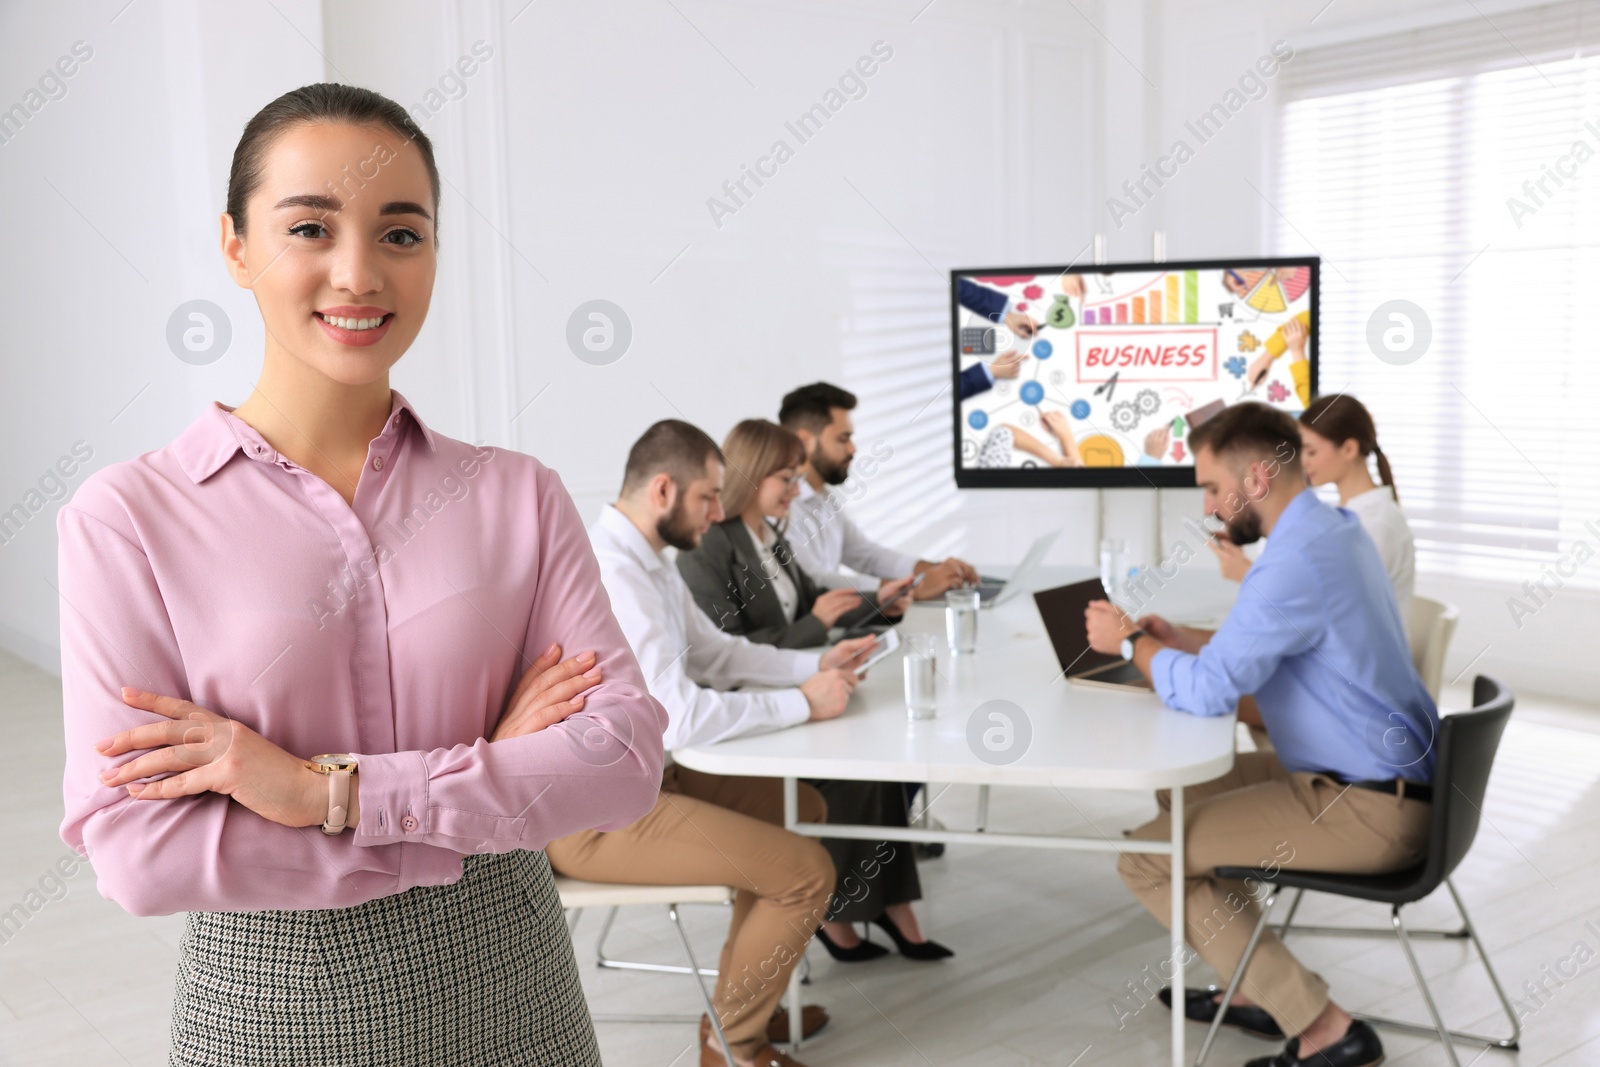 Photo of Business trainer in meeting room with interactive board during presentation